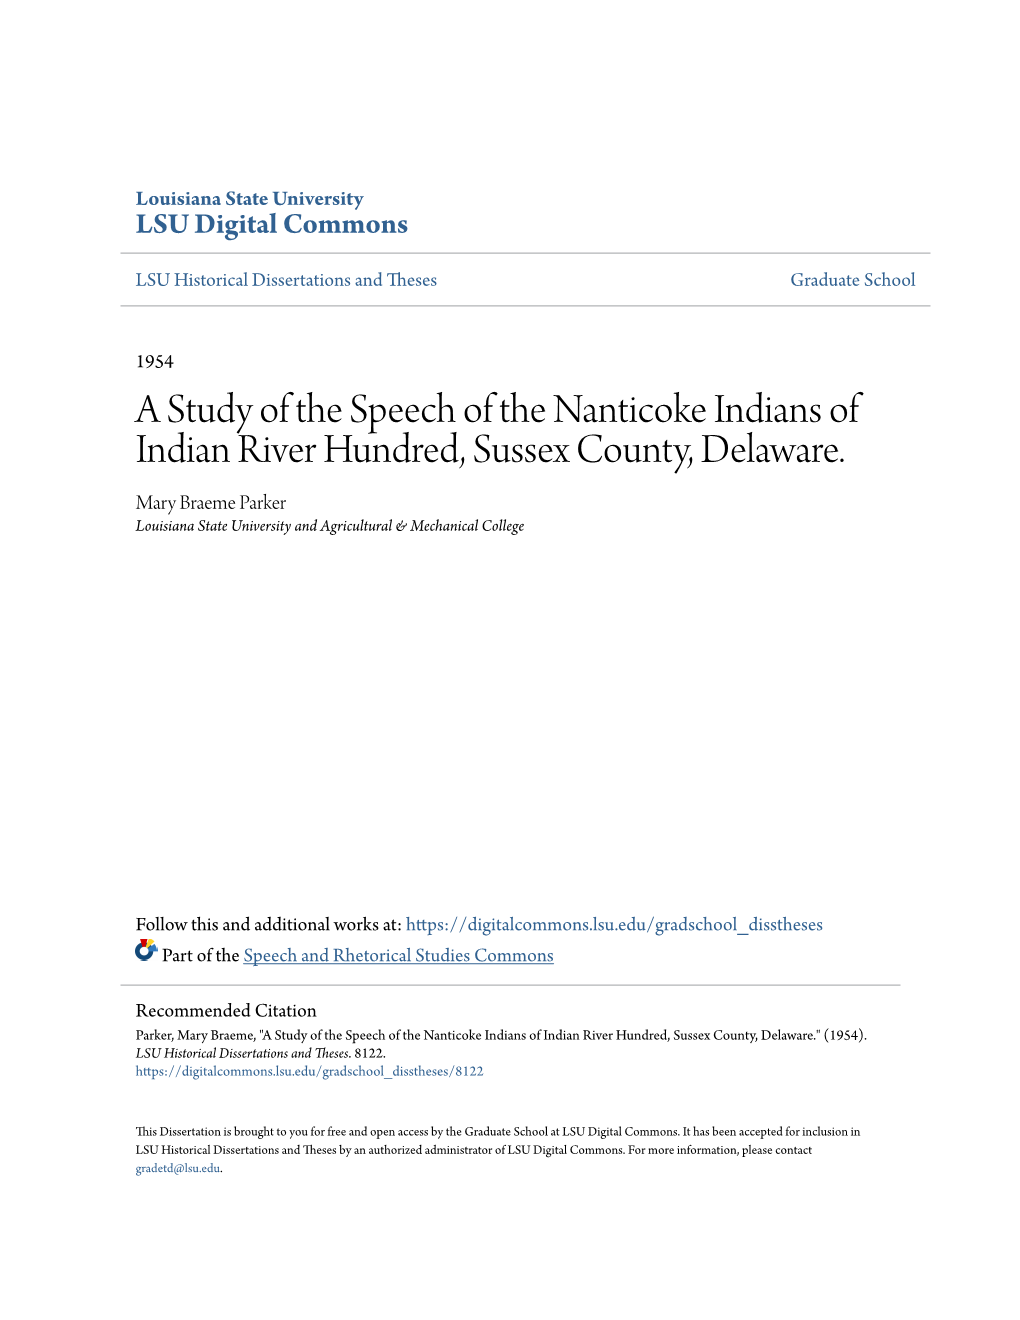 A Study of the Speech of the Nanticoke Indians of Indian River Hundred, Sussex County, Delaware